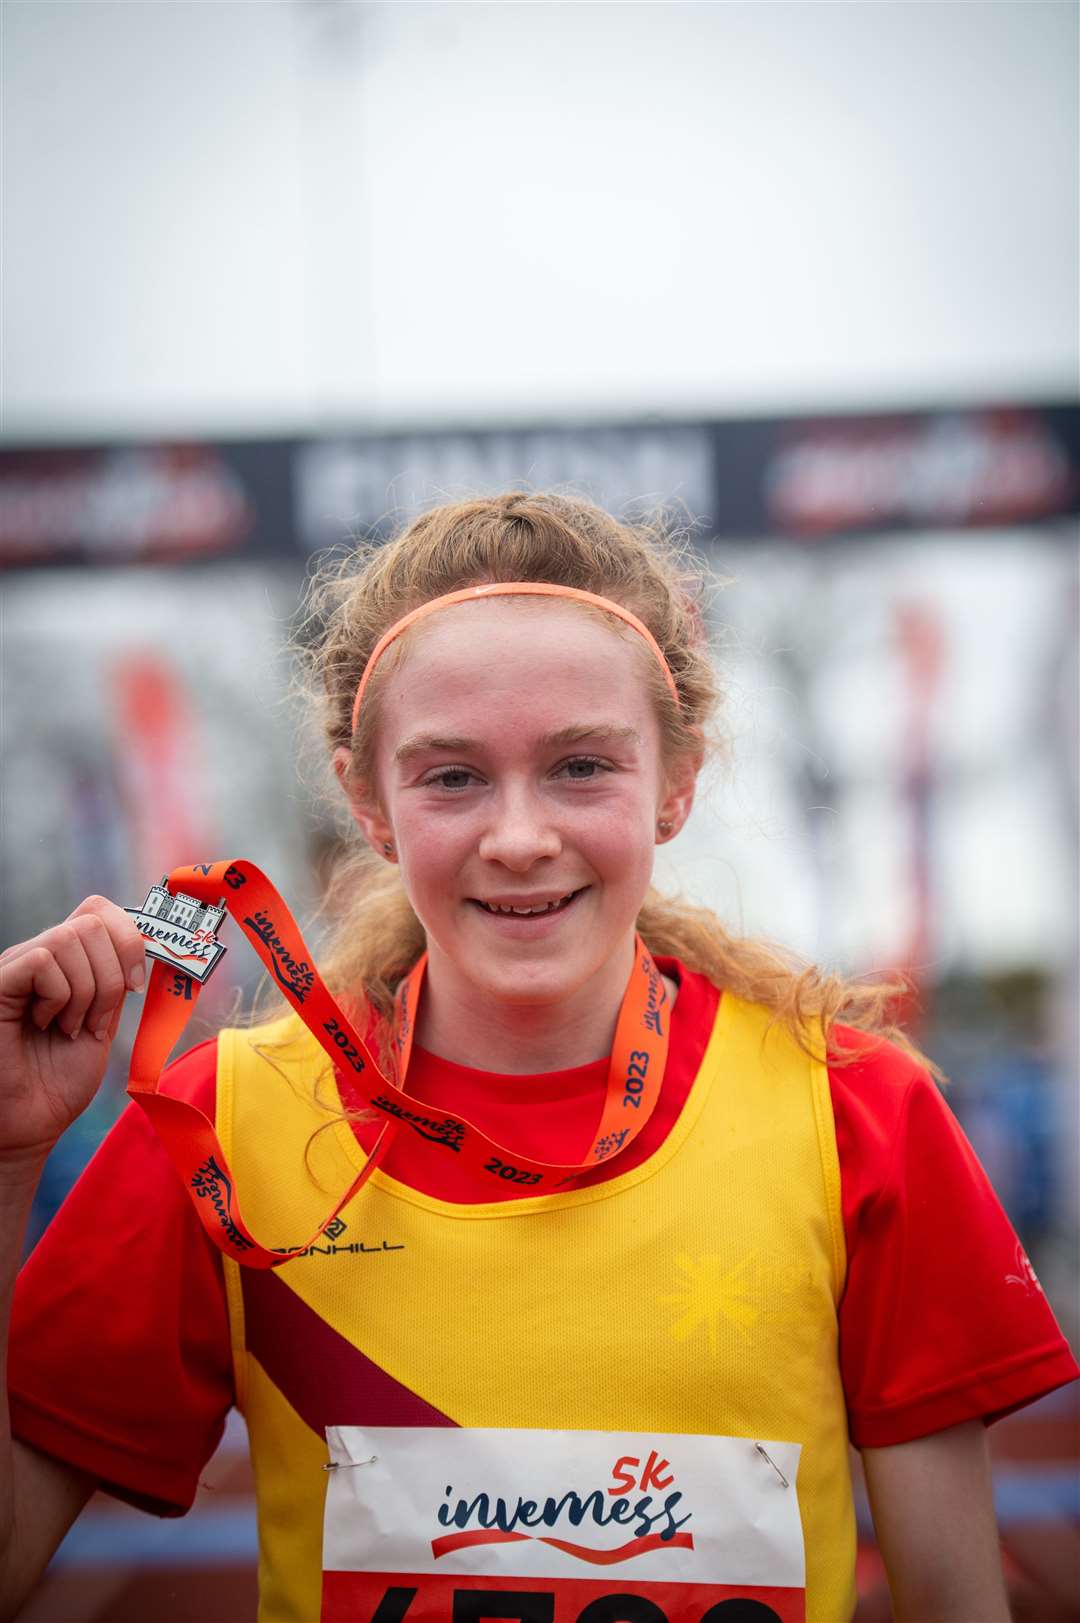 Lois Macrae won the Inverness 5k back in March.